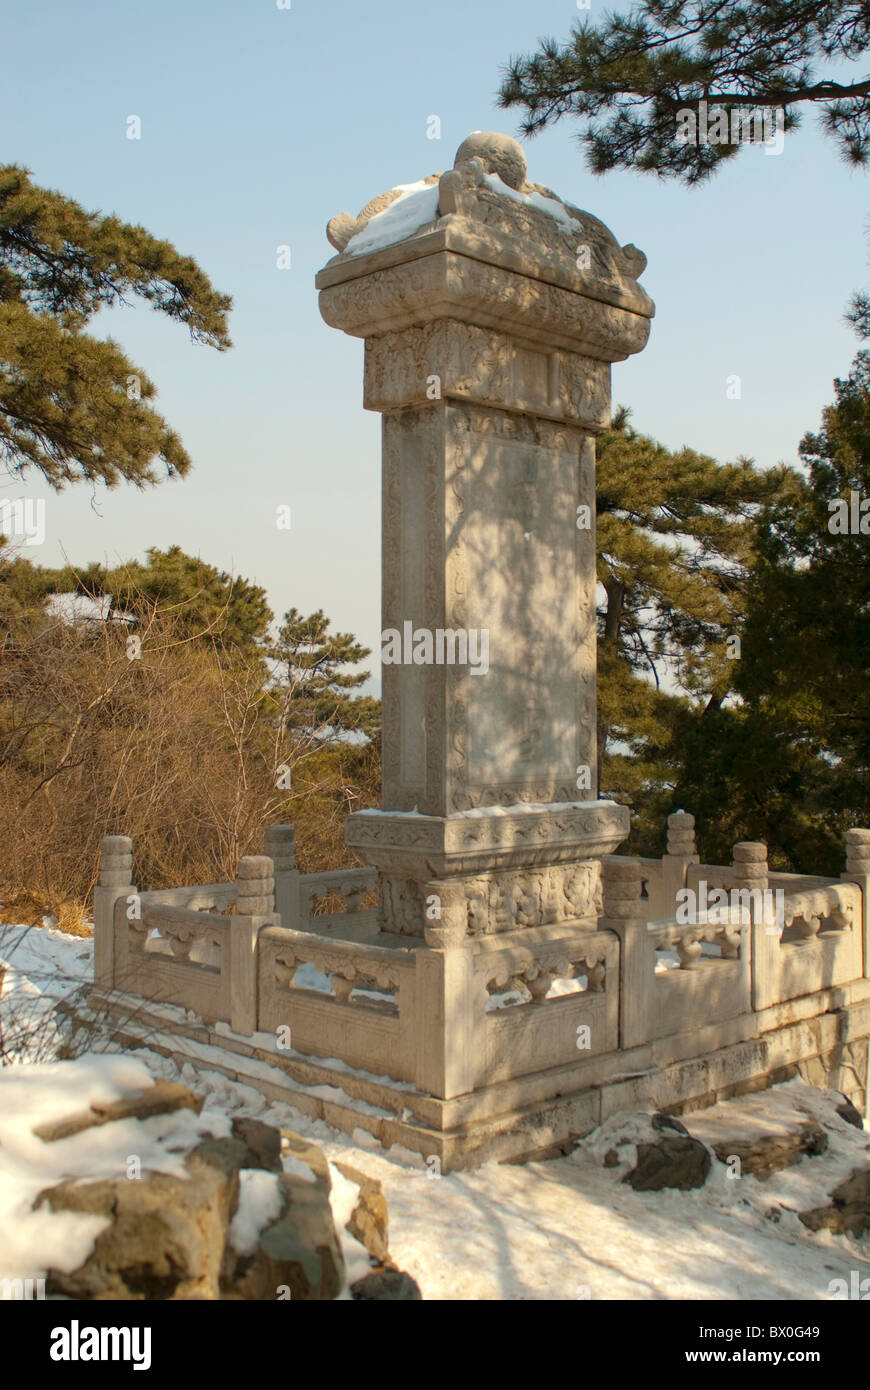 Memorial tablet of famous Beijing traditional scene Sunny Western Hills After Snow, Beijing, China Stock Photo